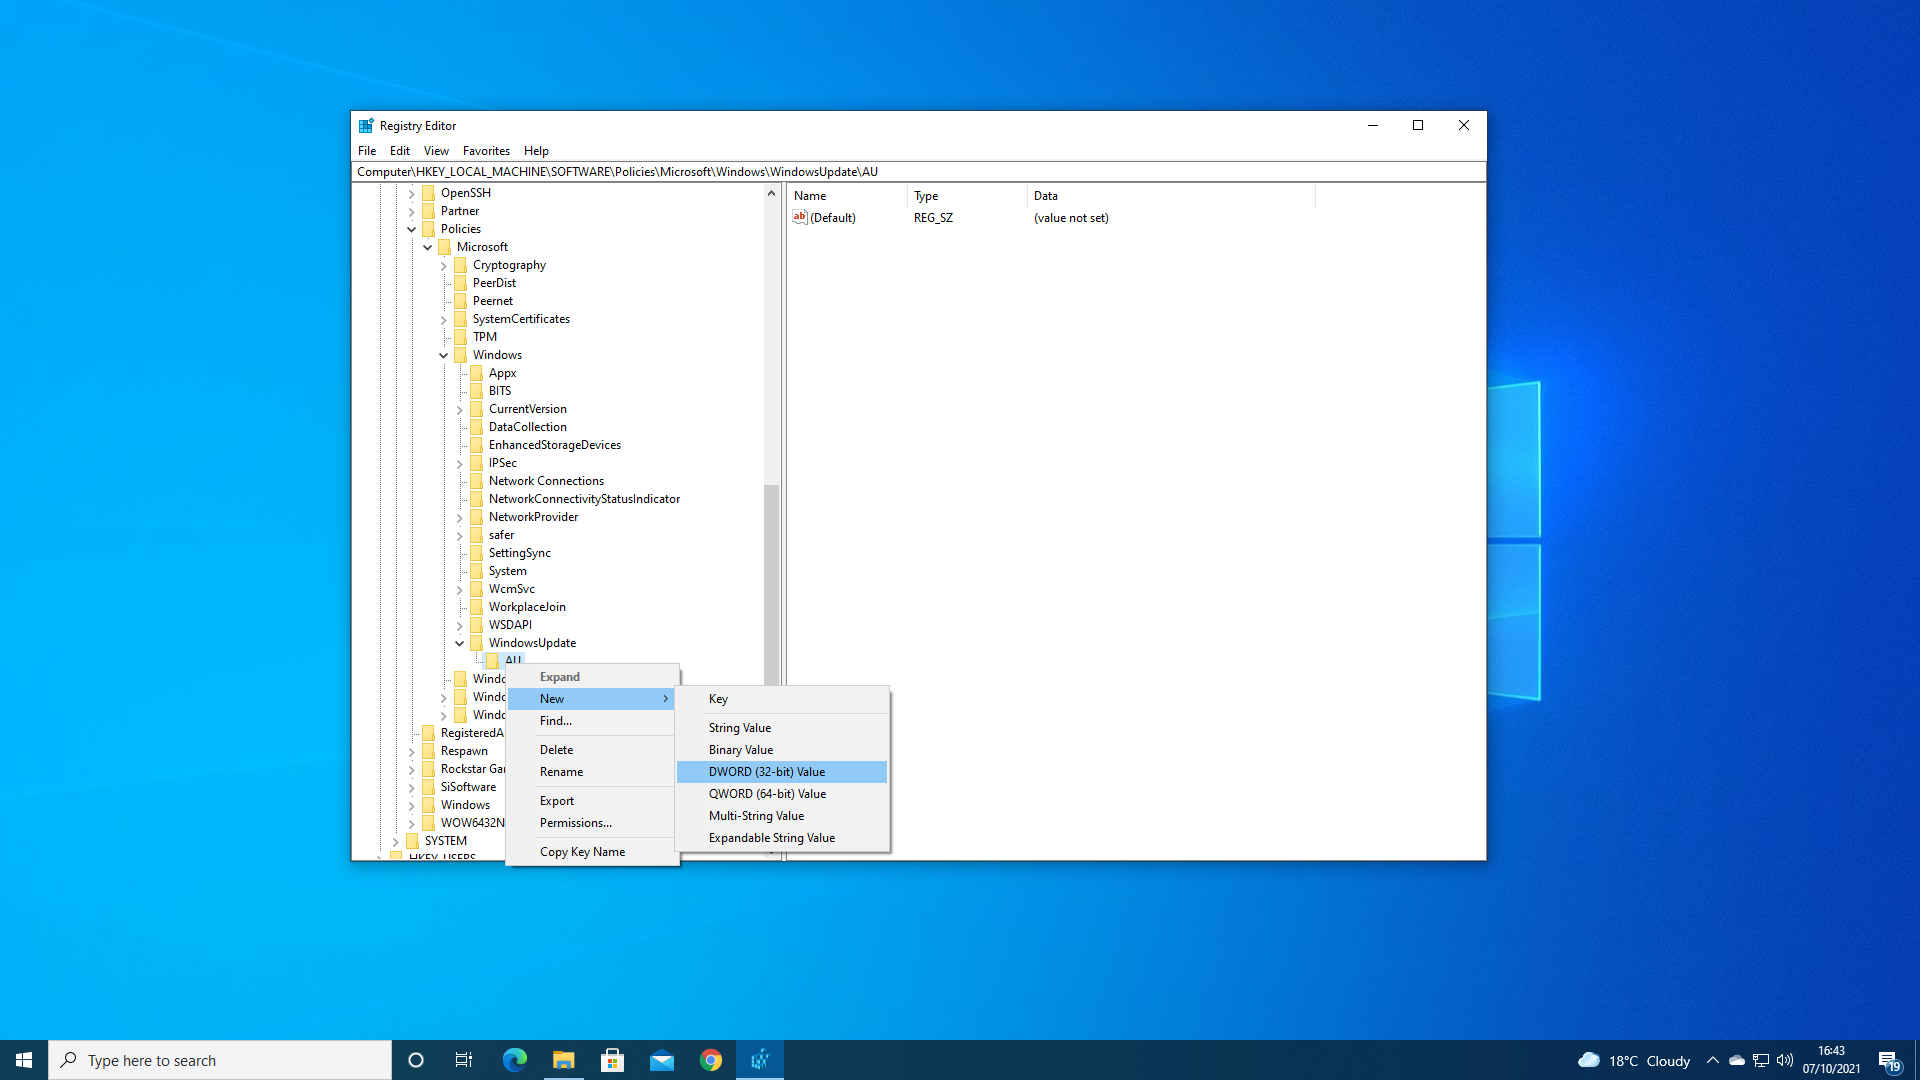 How to turn of Windows 10 Automatic updates